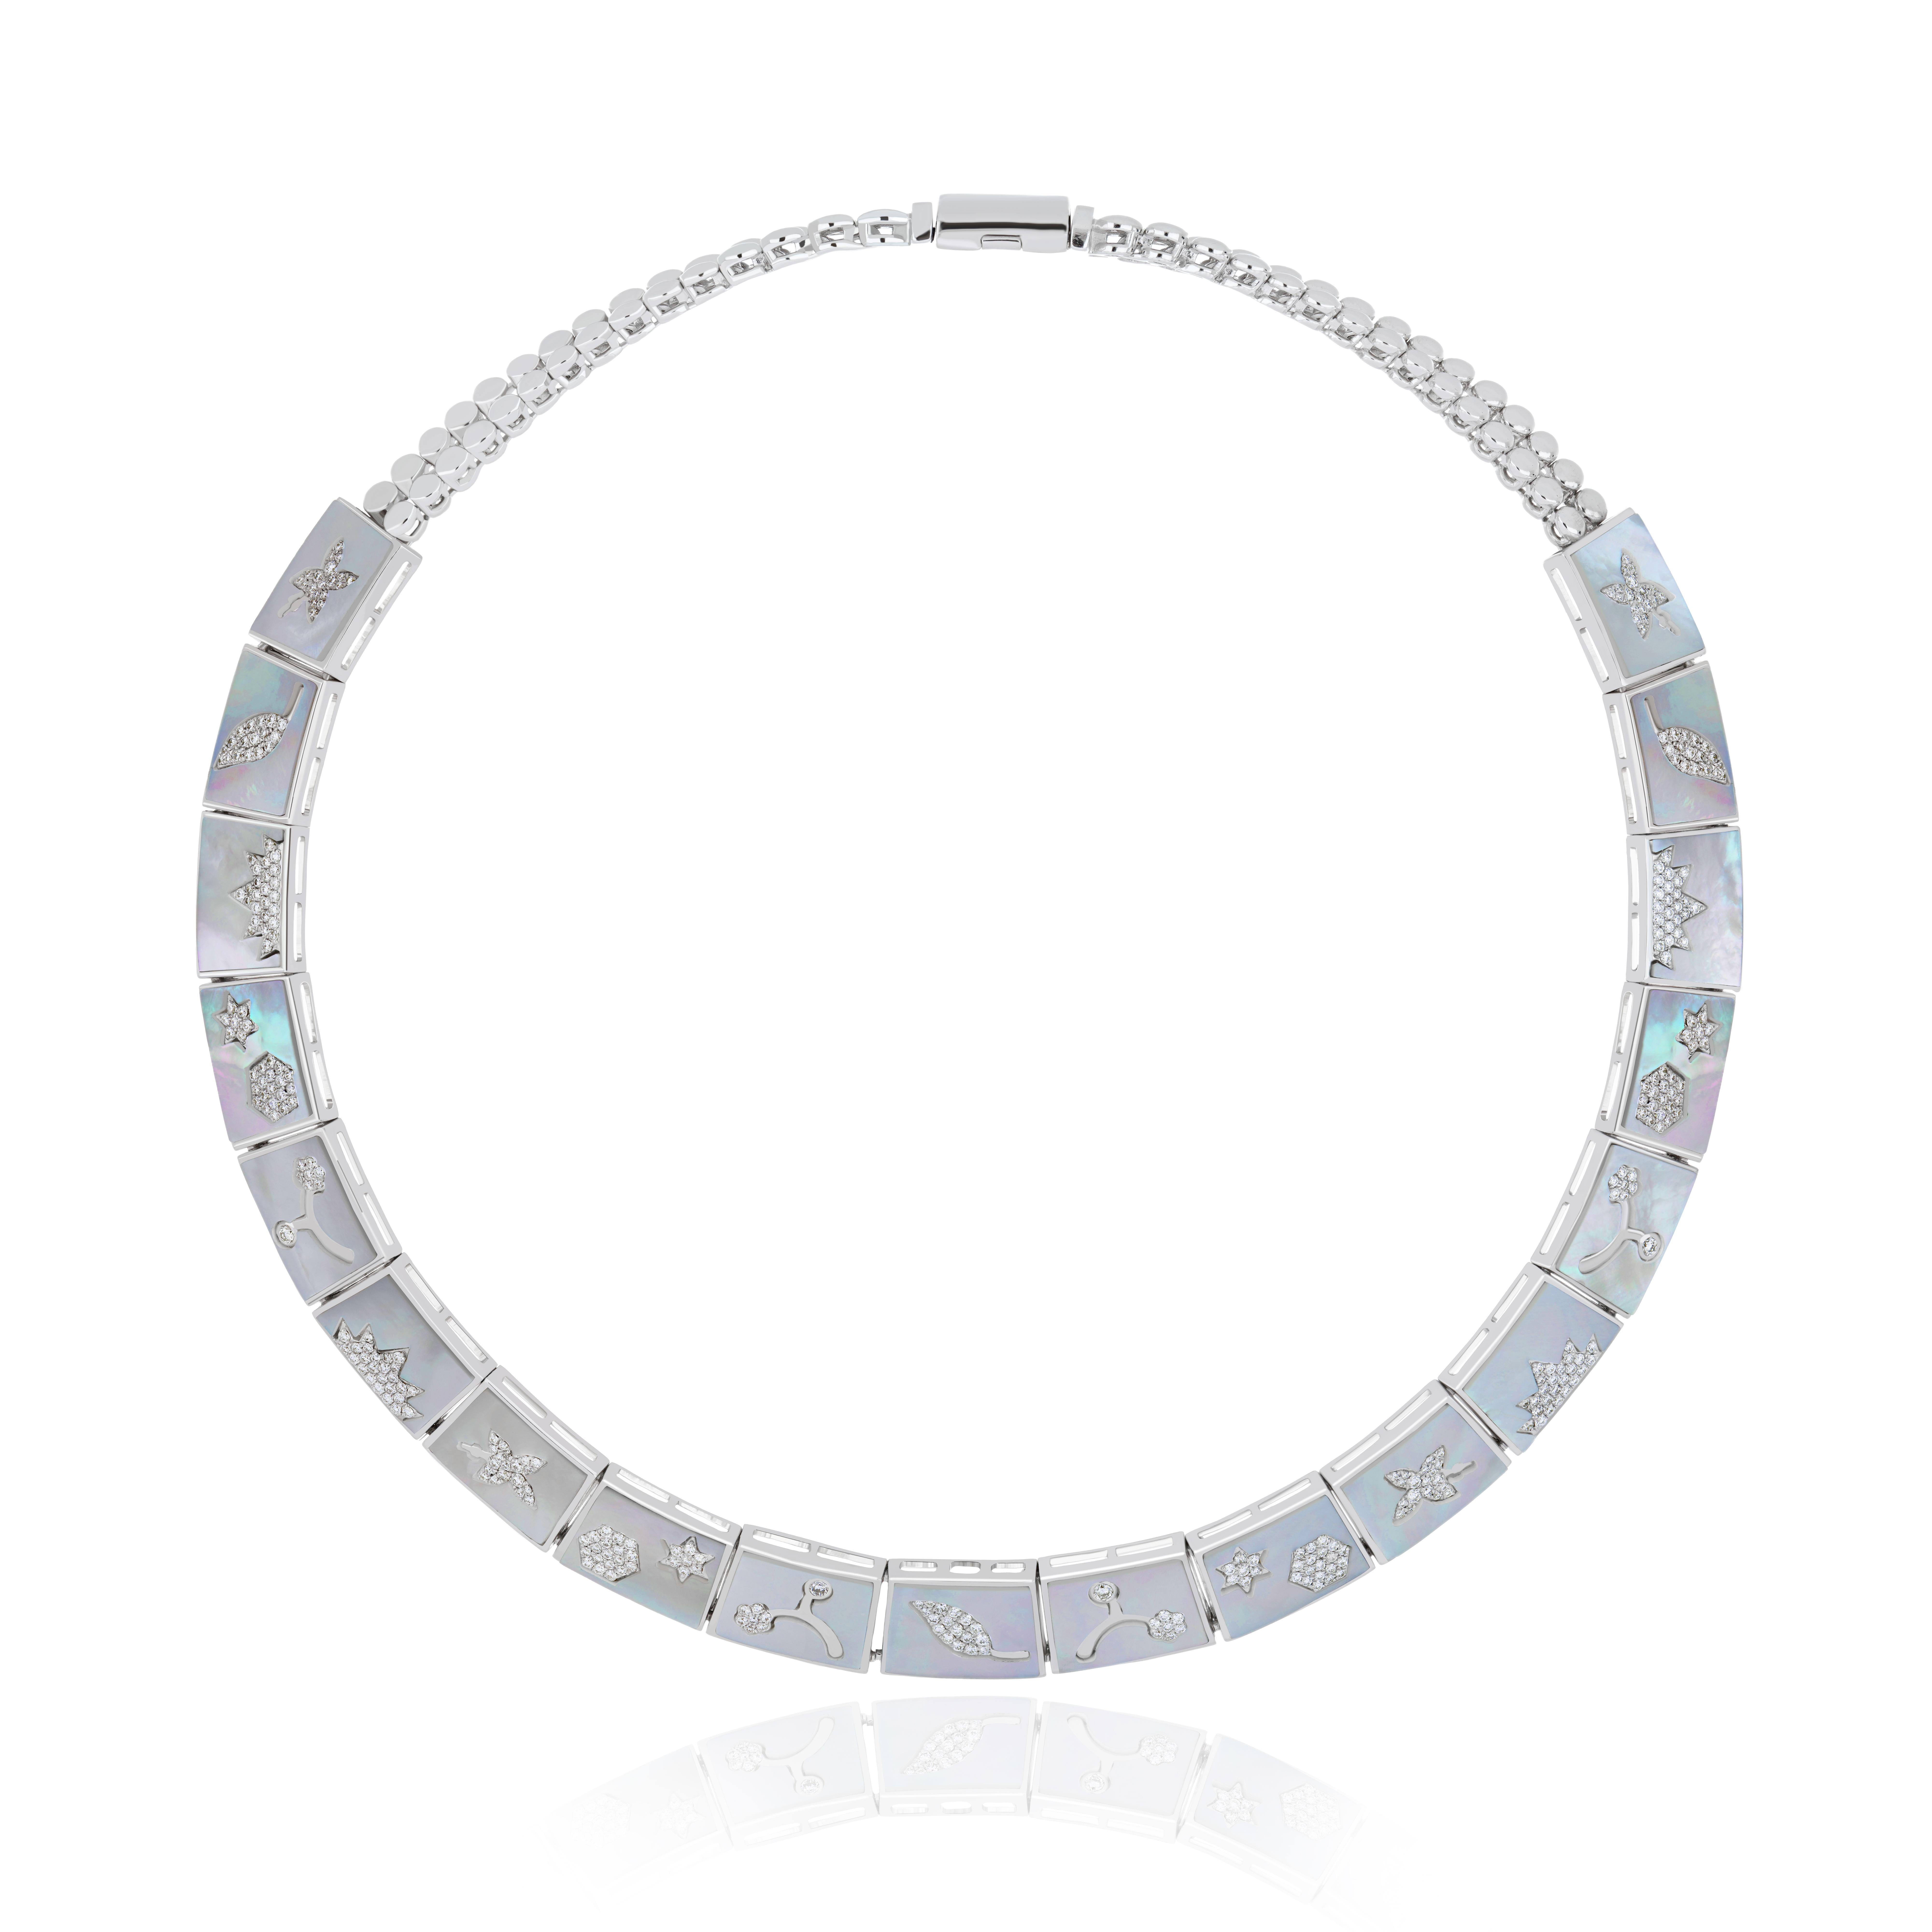 Elegant and Exquisitely detailed Gold Necklace, with 24.5 Cts (approx. total) Fancy Shape Tanzanite set in the center beautifully accented with Micro pave set Diamonds, weighing approx.9.8 CT's (approx. total). set in between  Mother of Pearl plates